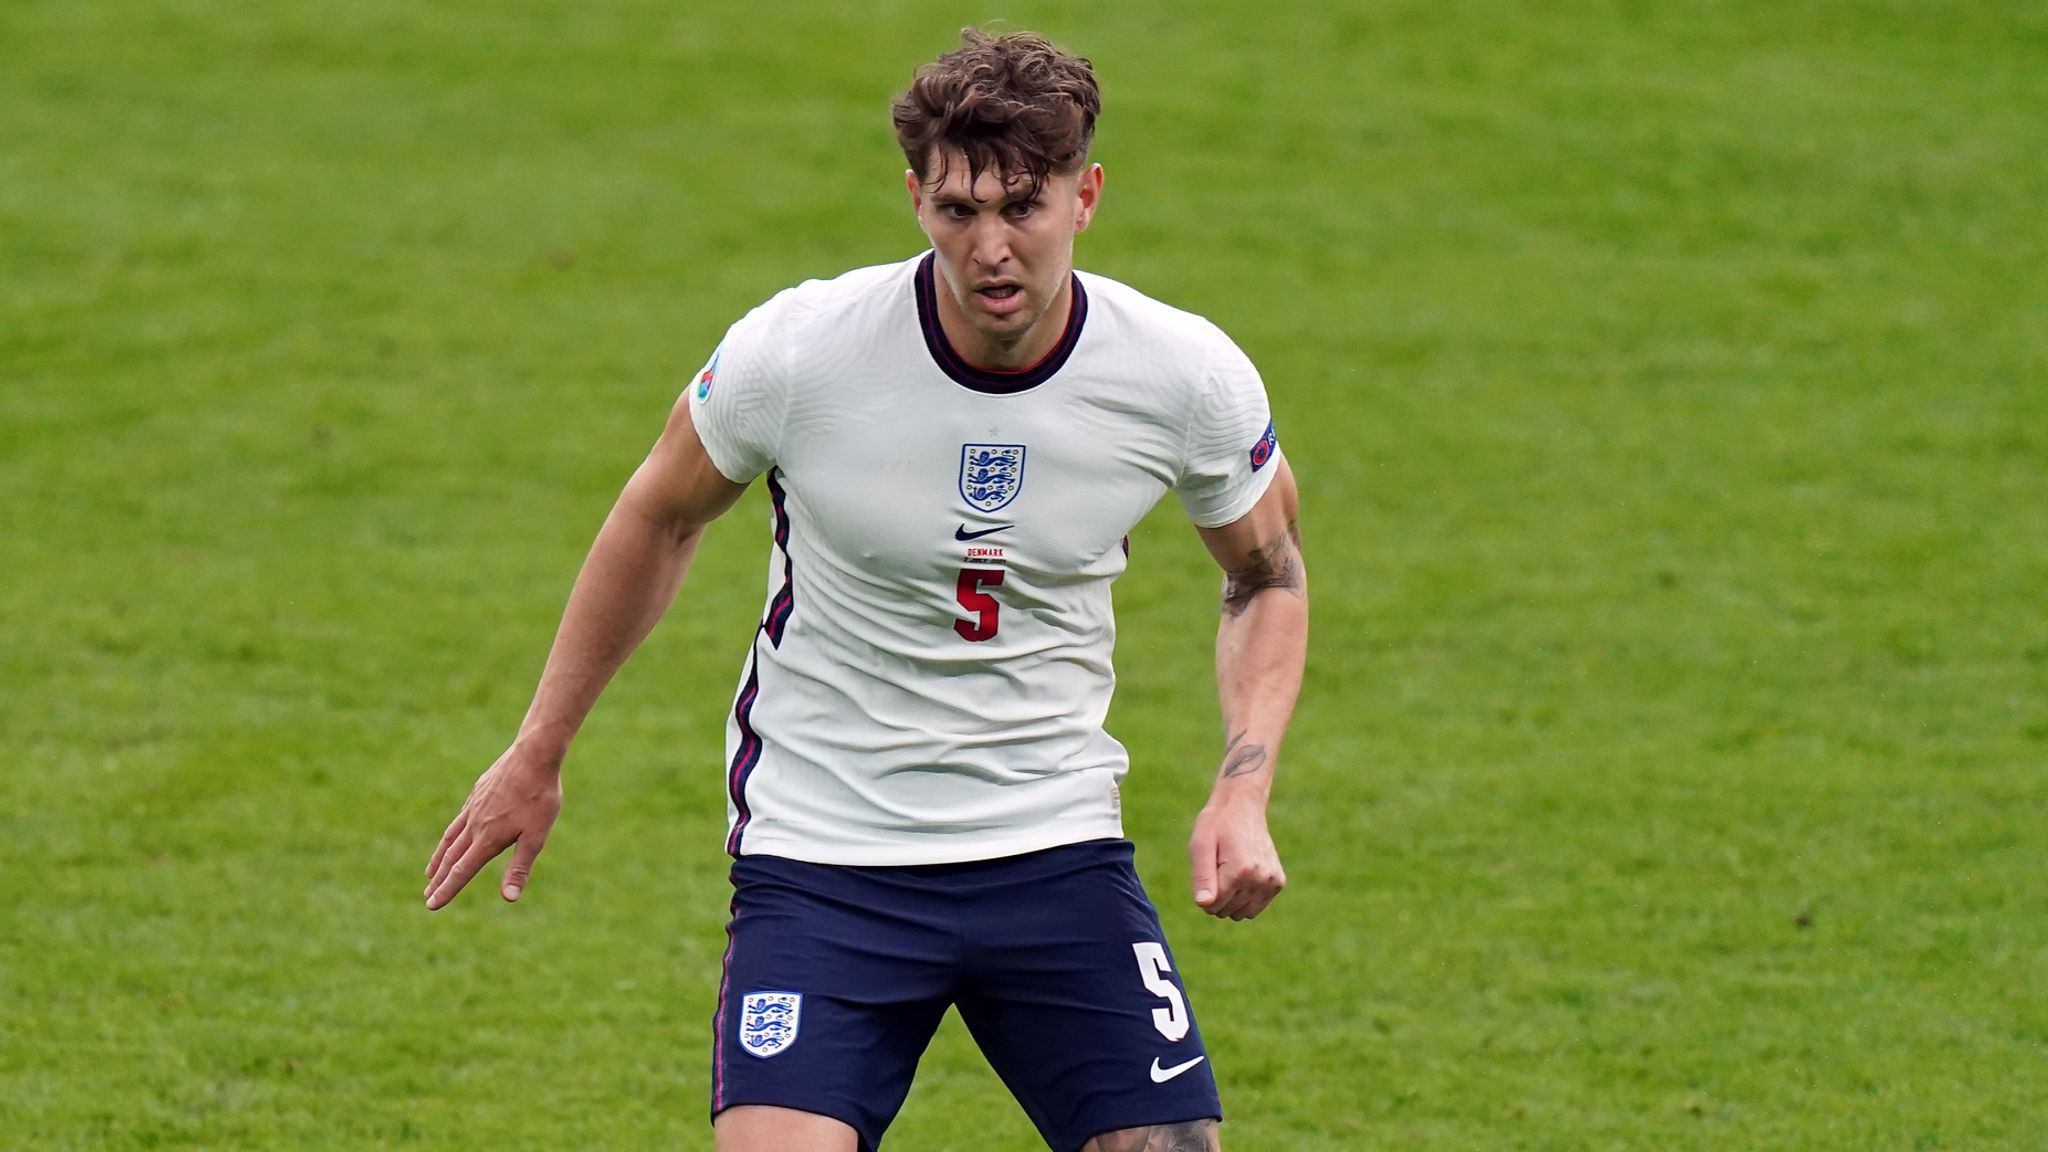 John Stones leaves camp and returns Manchester City after picking up injury | Football News | Sports